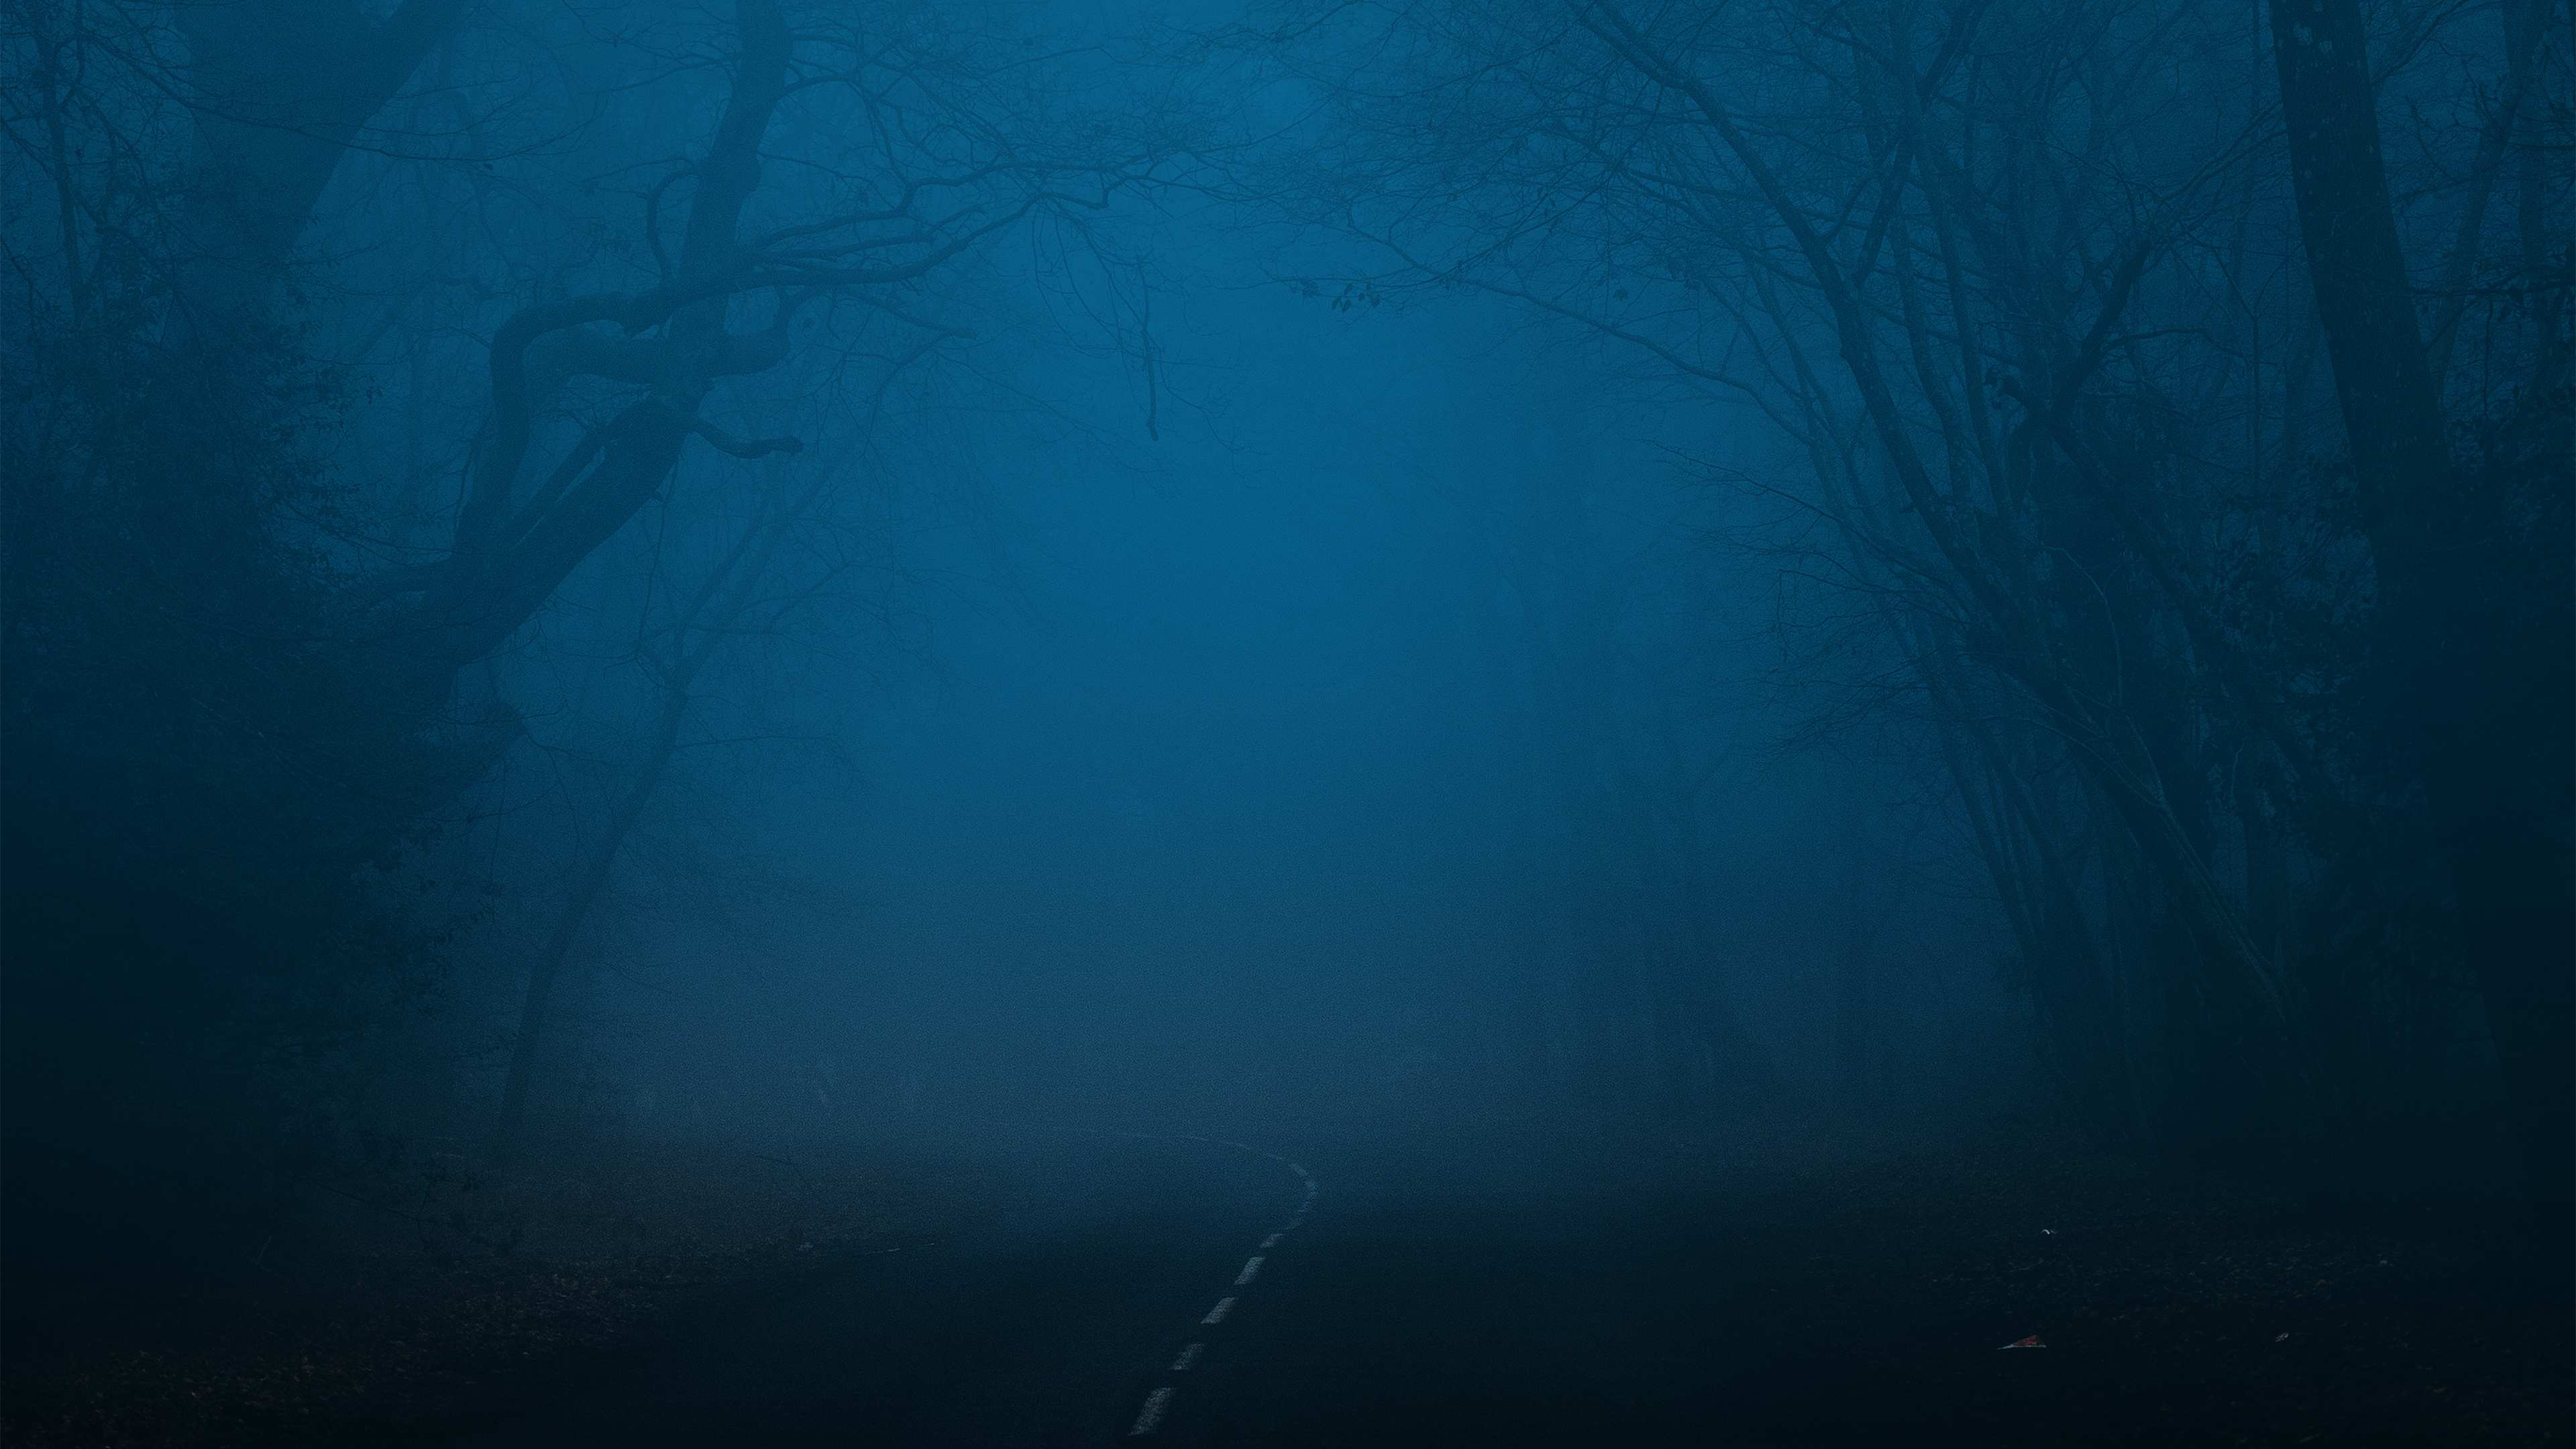 General 3840x2160 forest landscape night midnight nature 4K horror road minimalism simple background